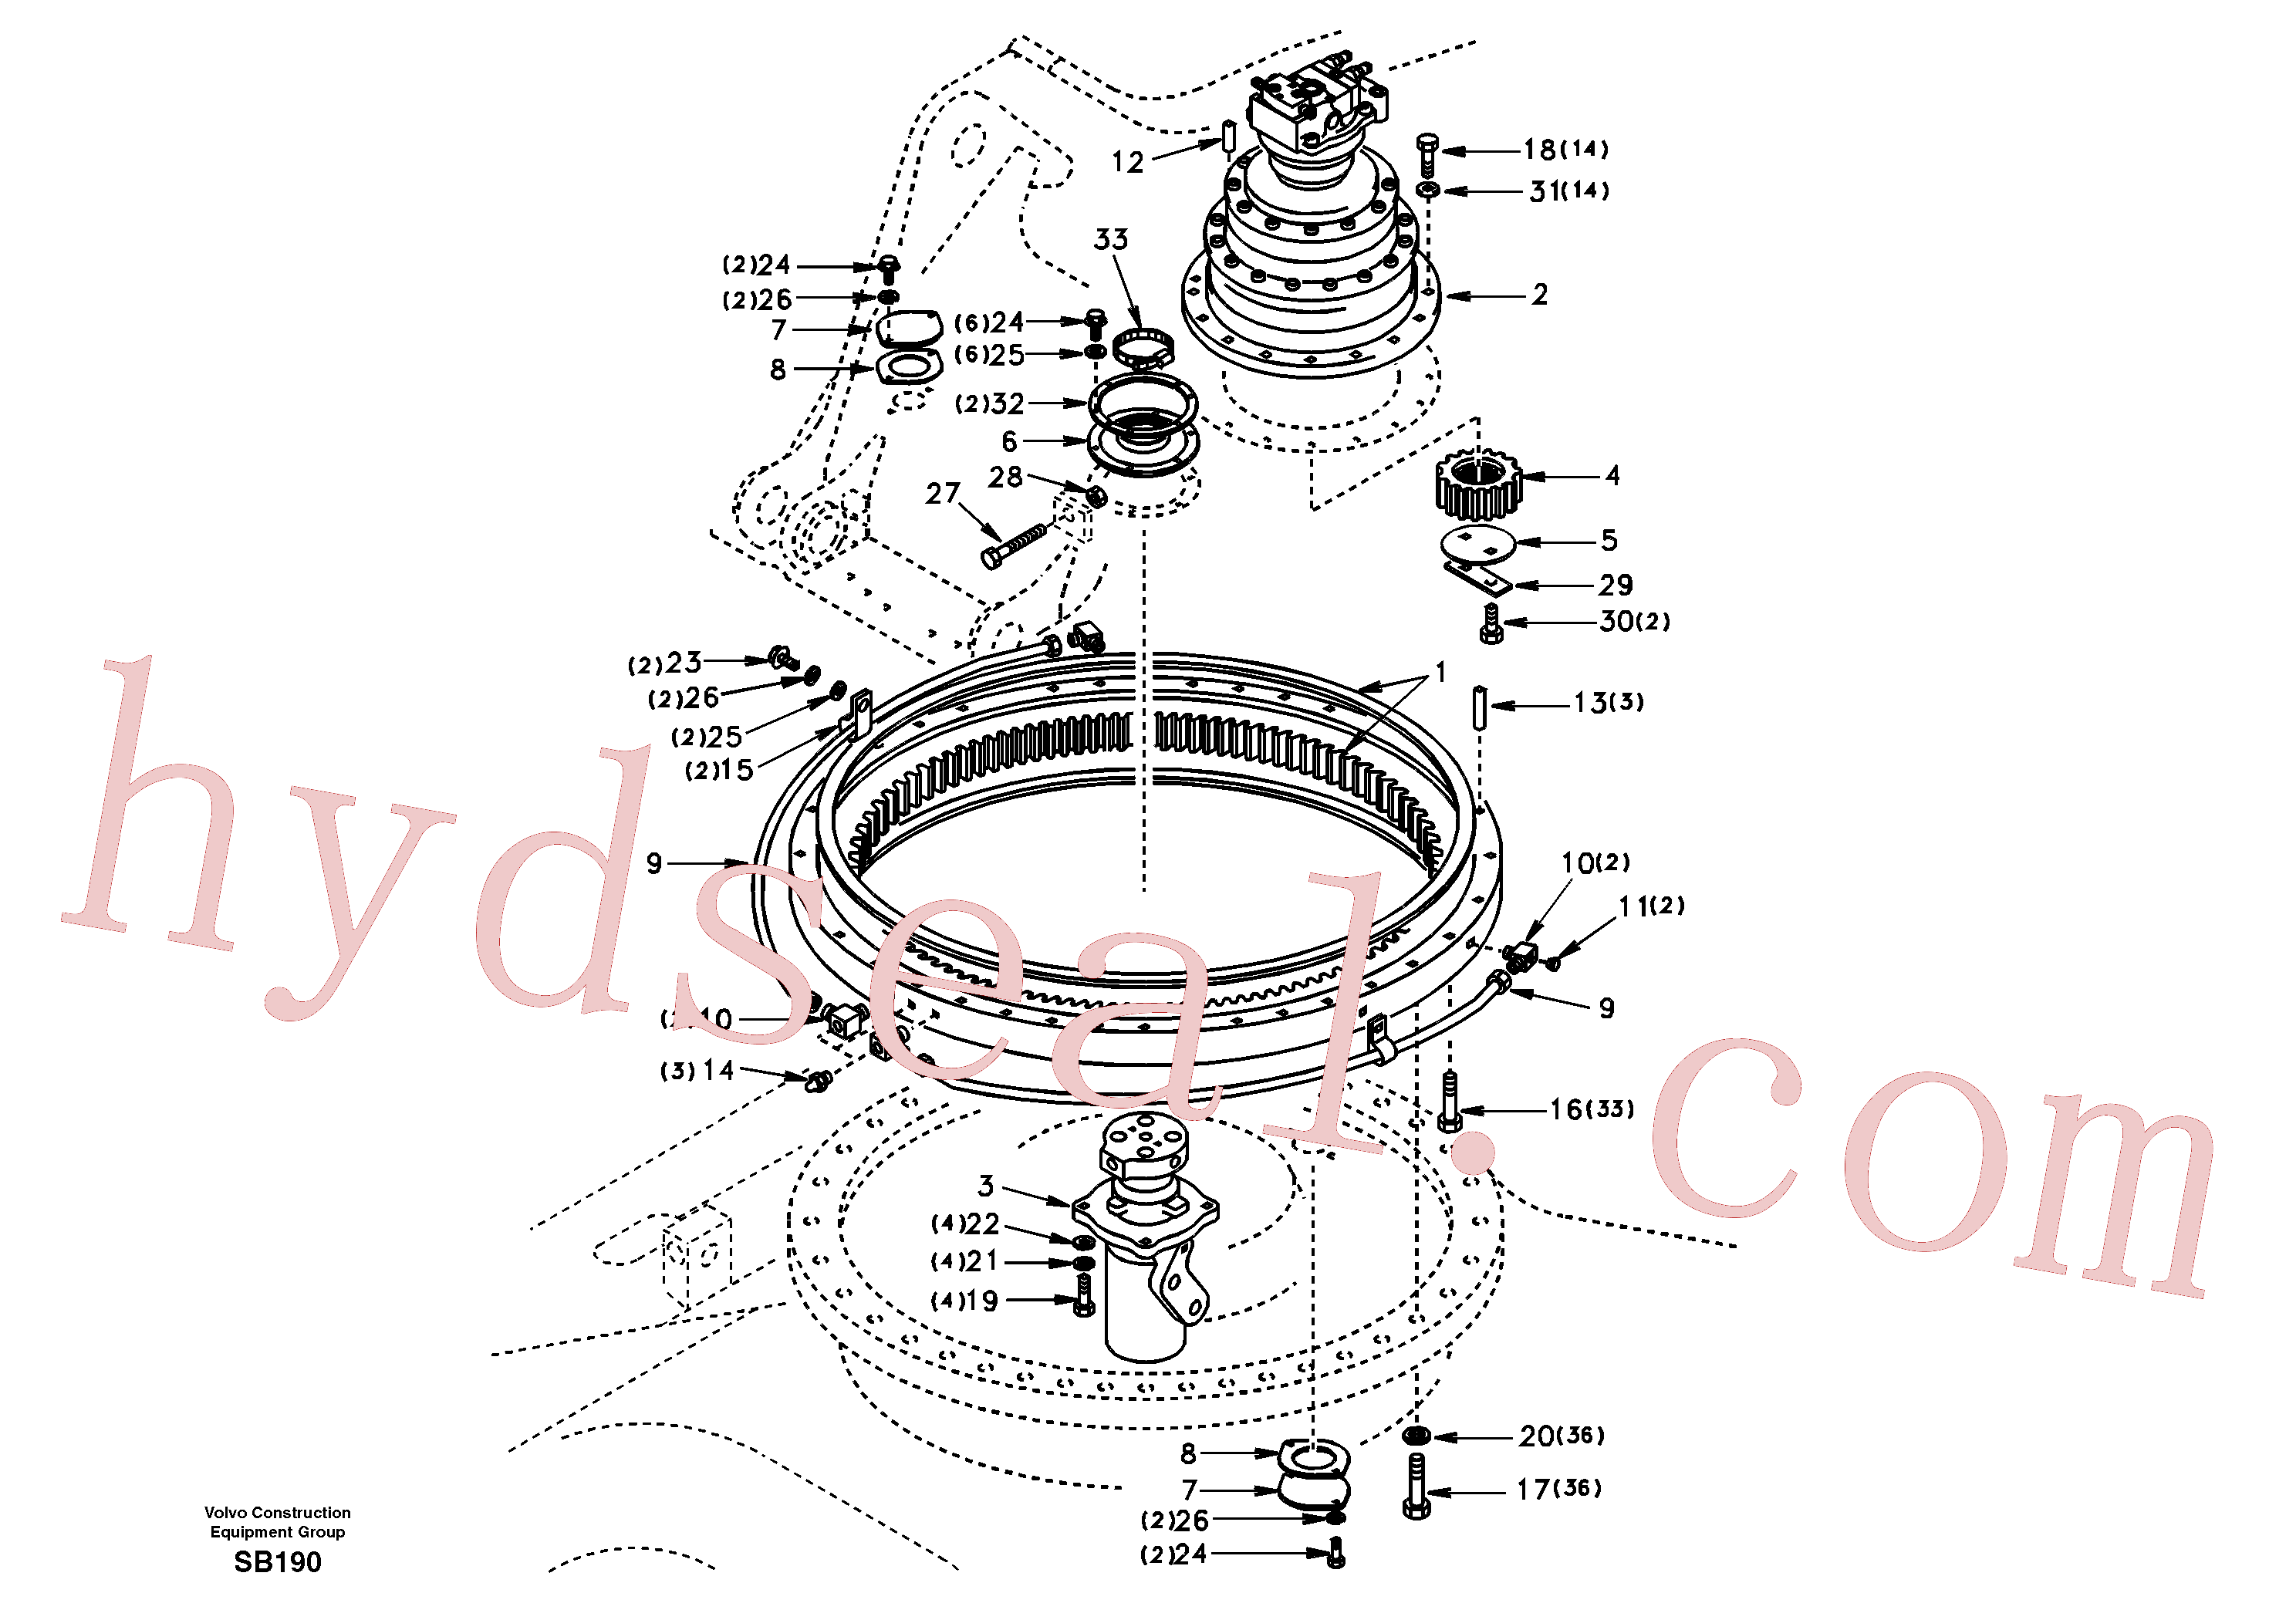 SA1155-01110 for Volvo Swing system(SB190 assembly)